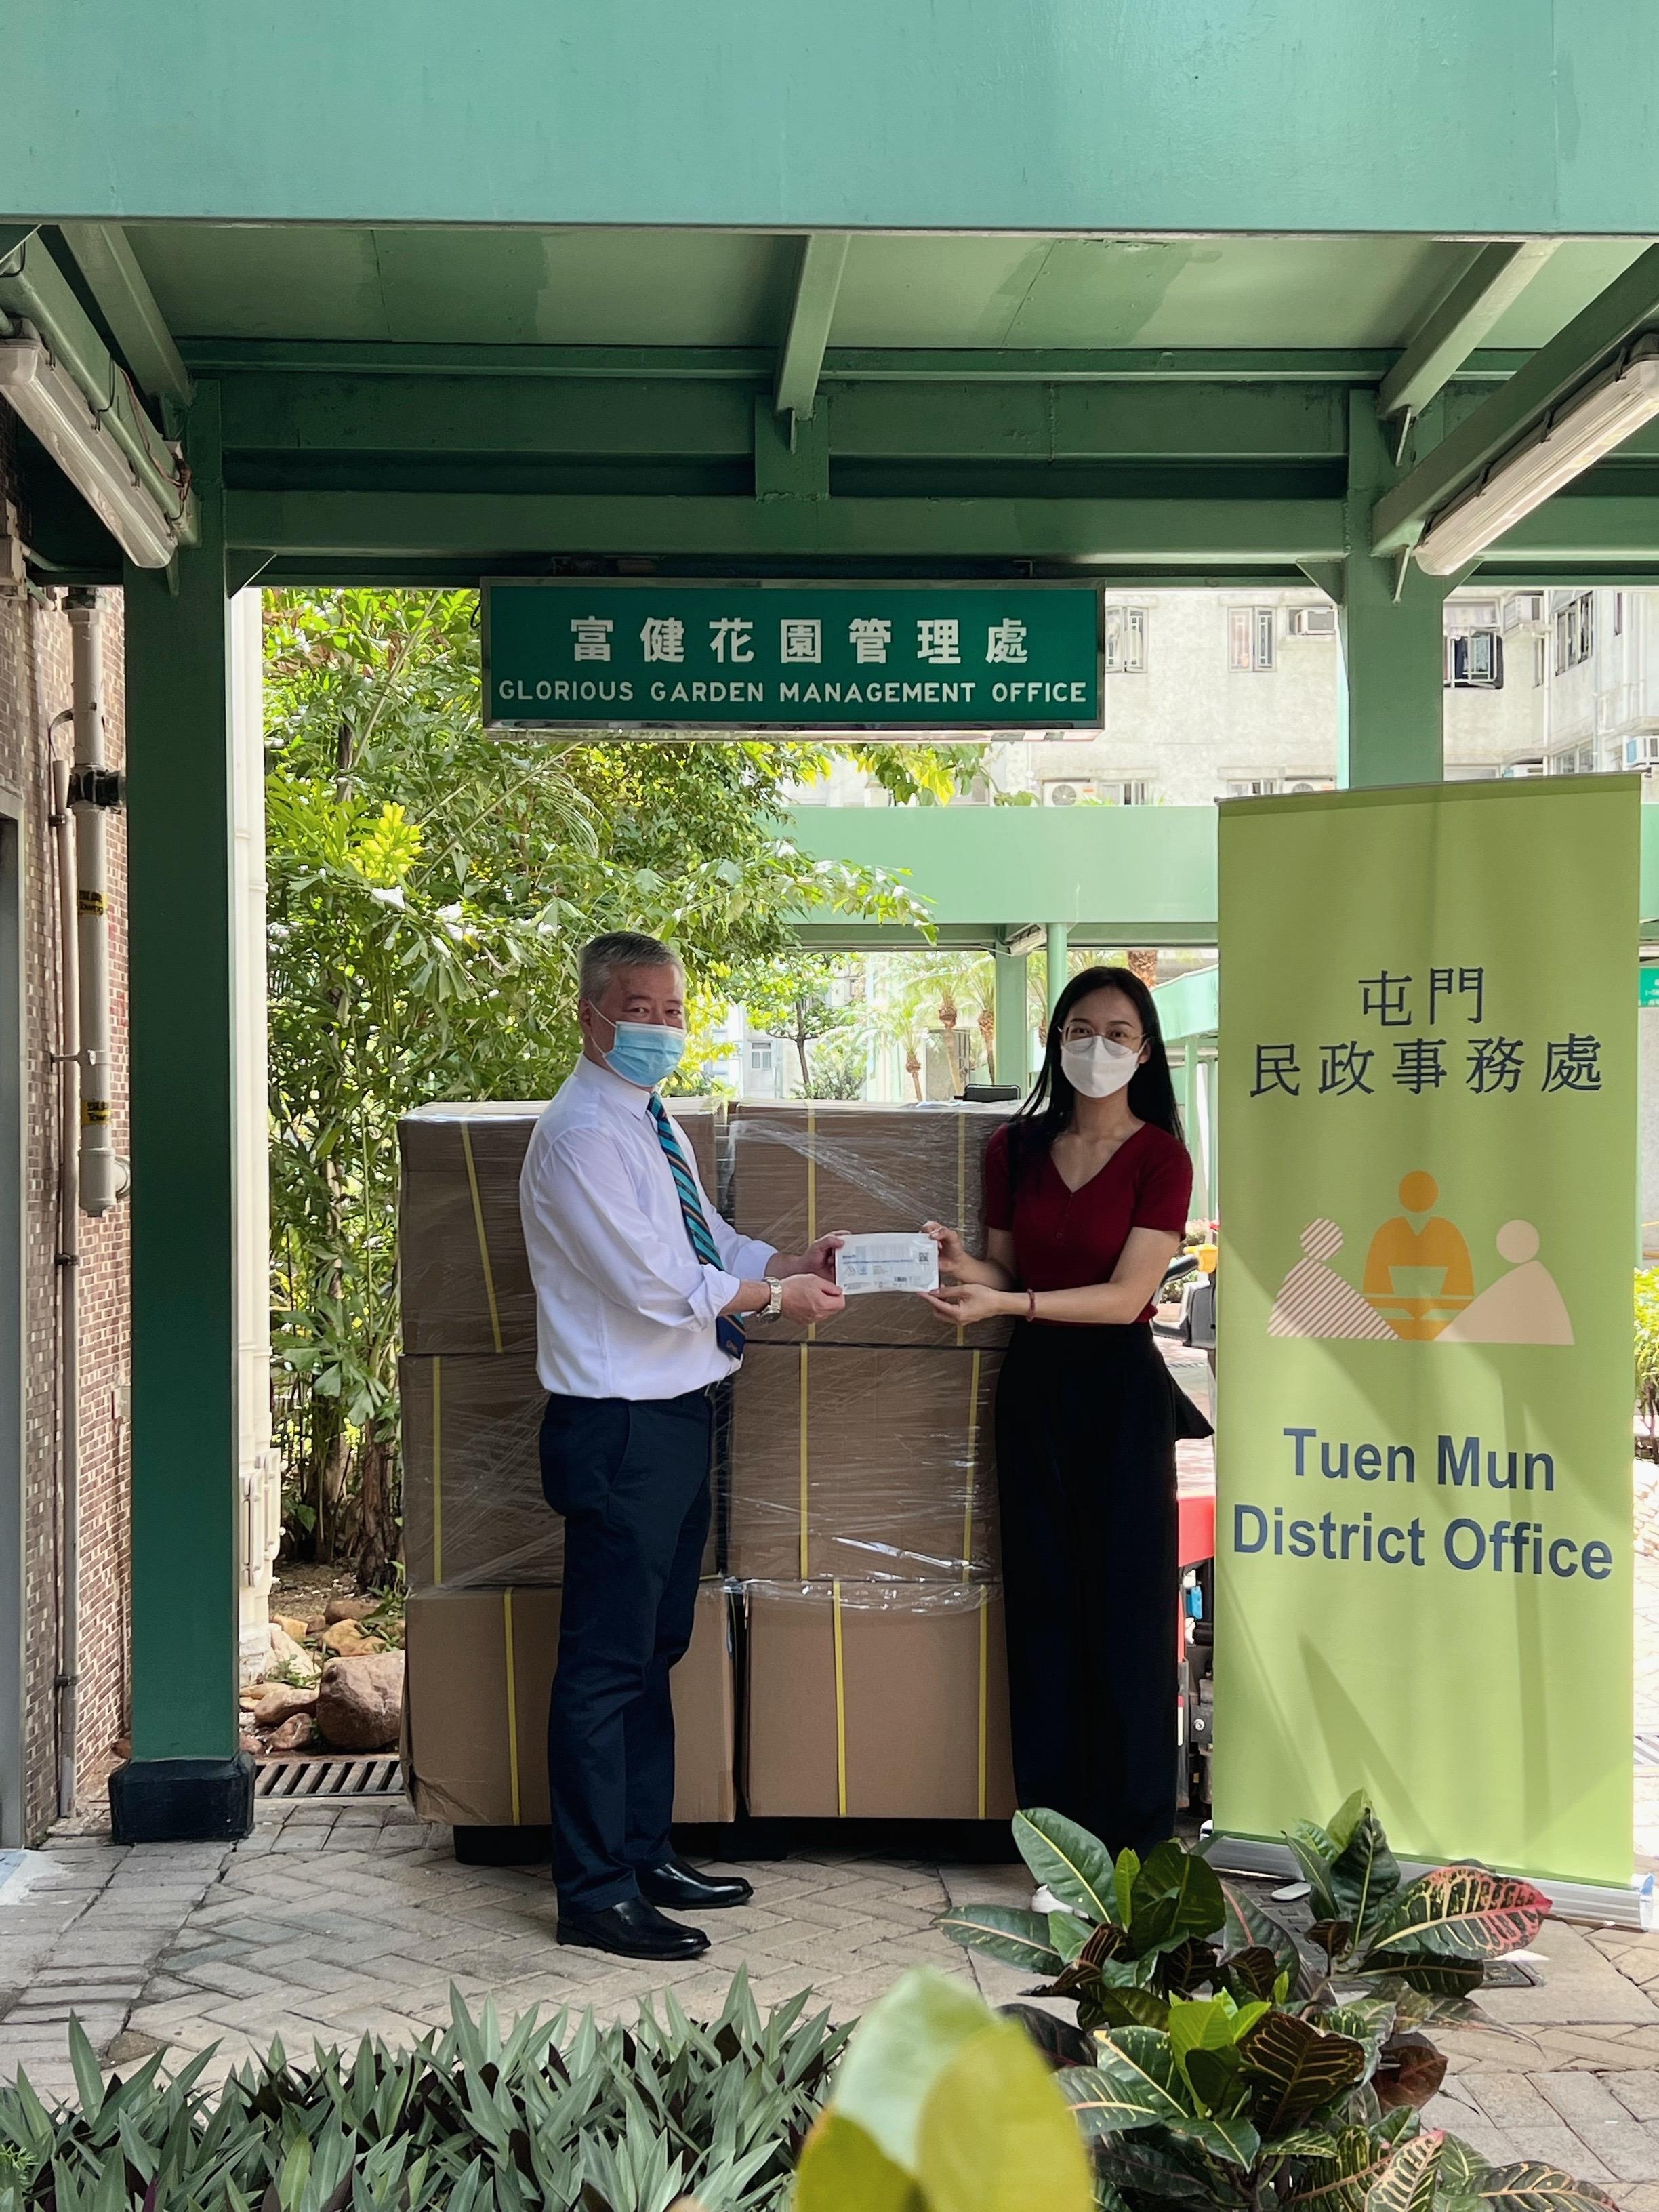 The Tuen Mun District Office today (June 29) distributed COVID-19 rapid test kits to households, cleansing workers and property management staff living and working in Glorious Garden for voluntary testing through the property management company.